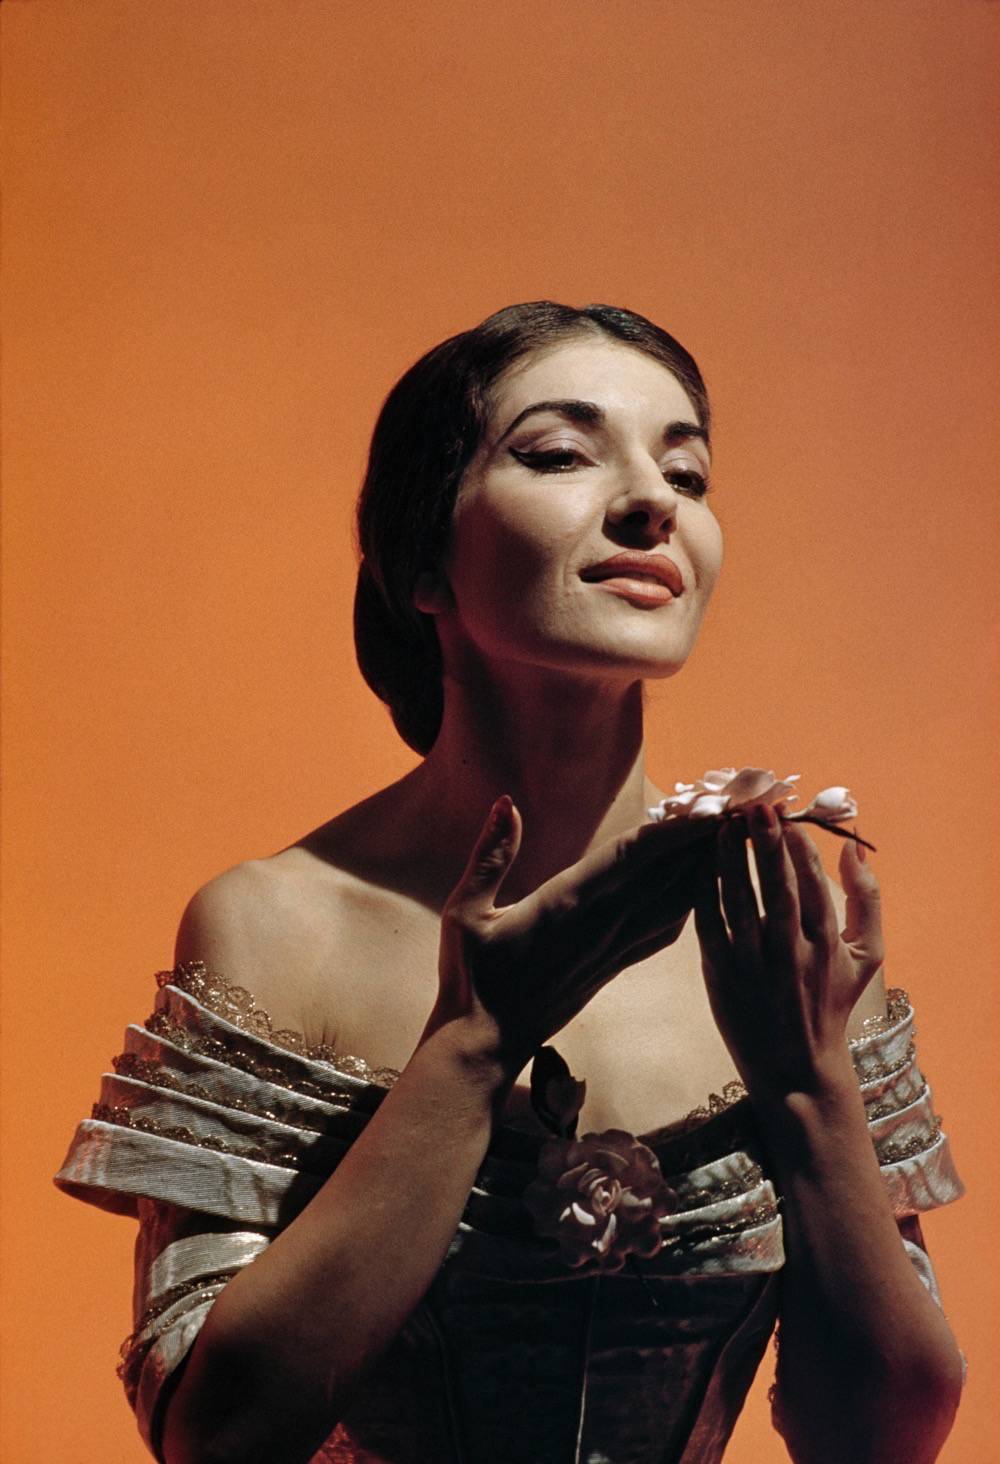 ITALY. Milan. 1955. Maria CALLAS in the role of the Lady of the Camelias at La Scala.